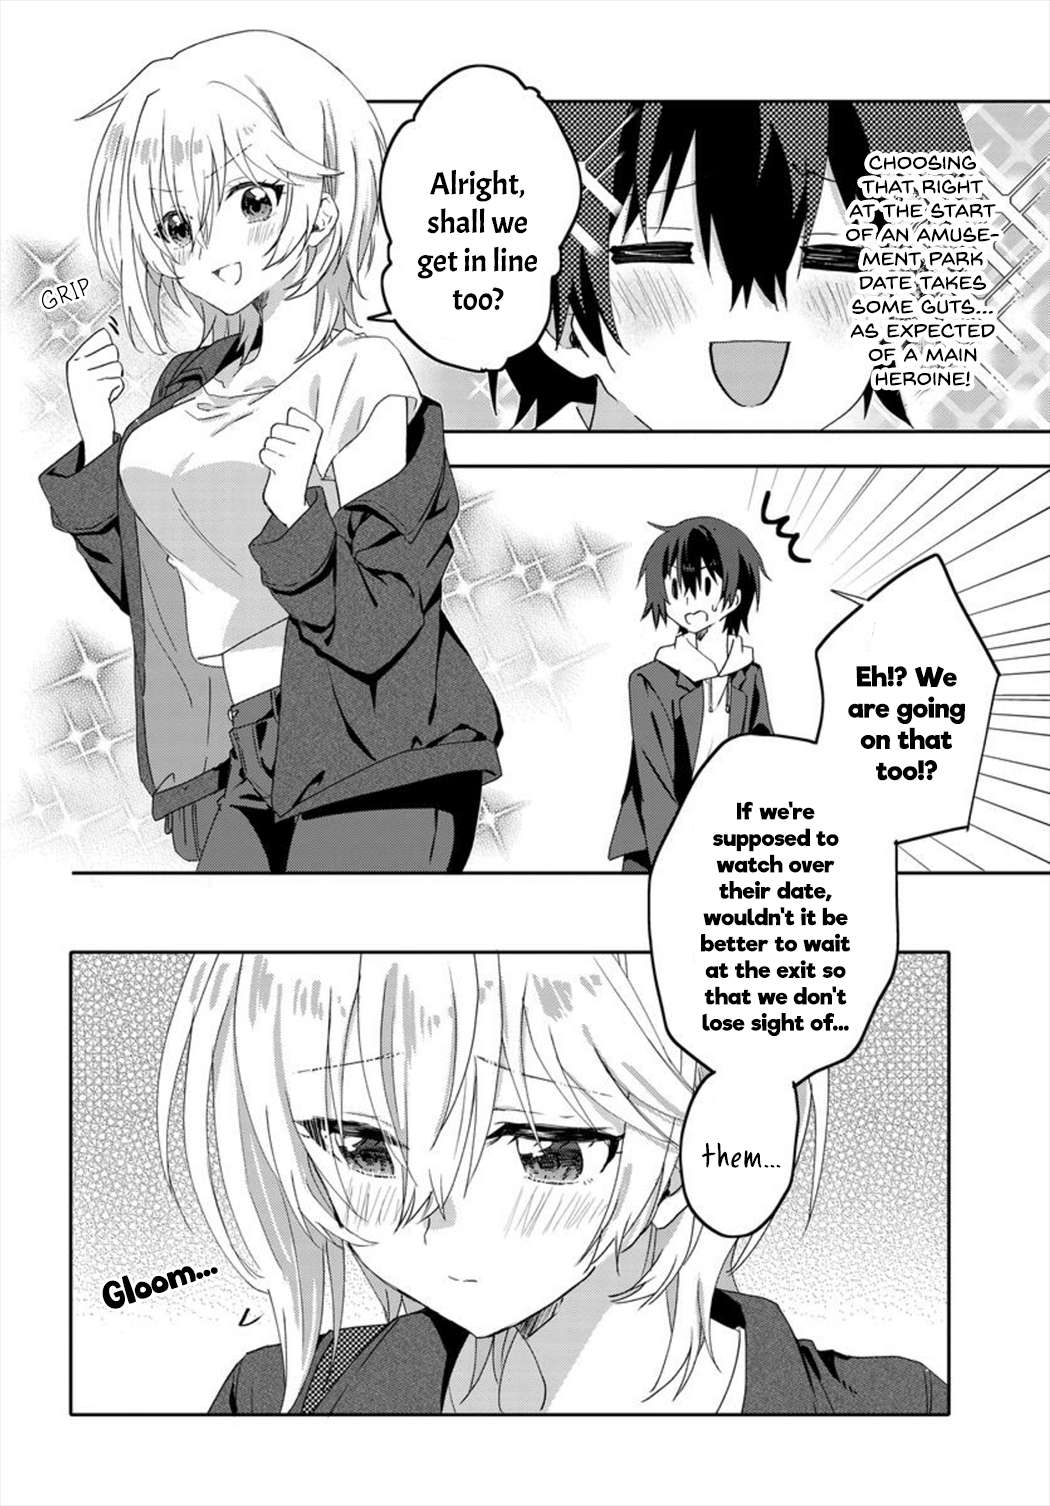 Since I’Ve Entered The World Of Romantic Comedy Manga, I’Ll Do My Best To Make The Losing Heroine Happy - chapter 7.1 - #2